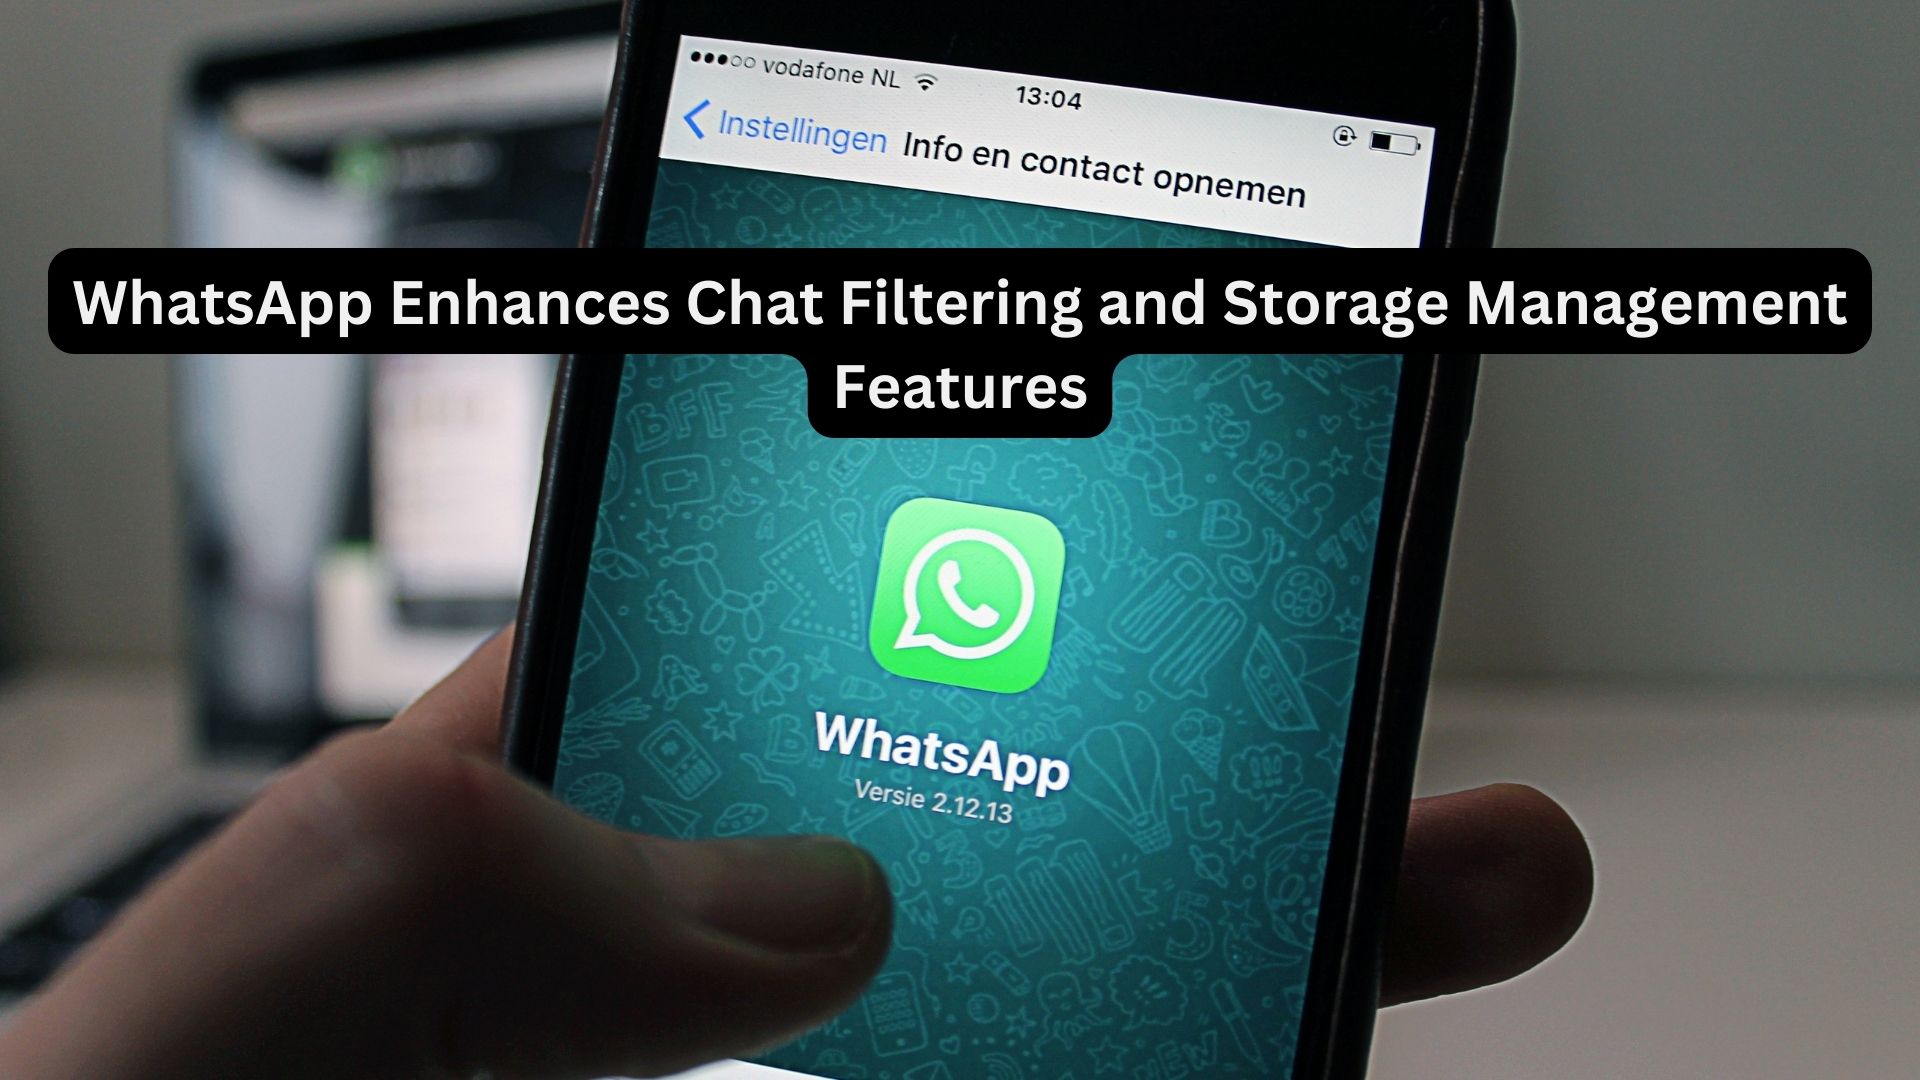 WhatsApp Enhances Chat Filtering and Storage Management Features